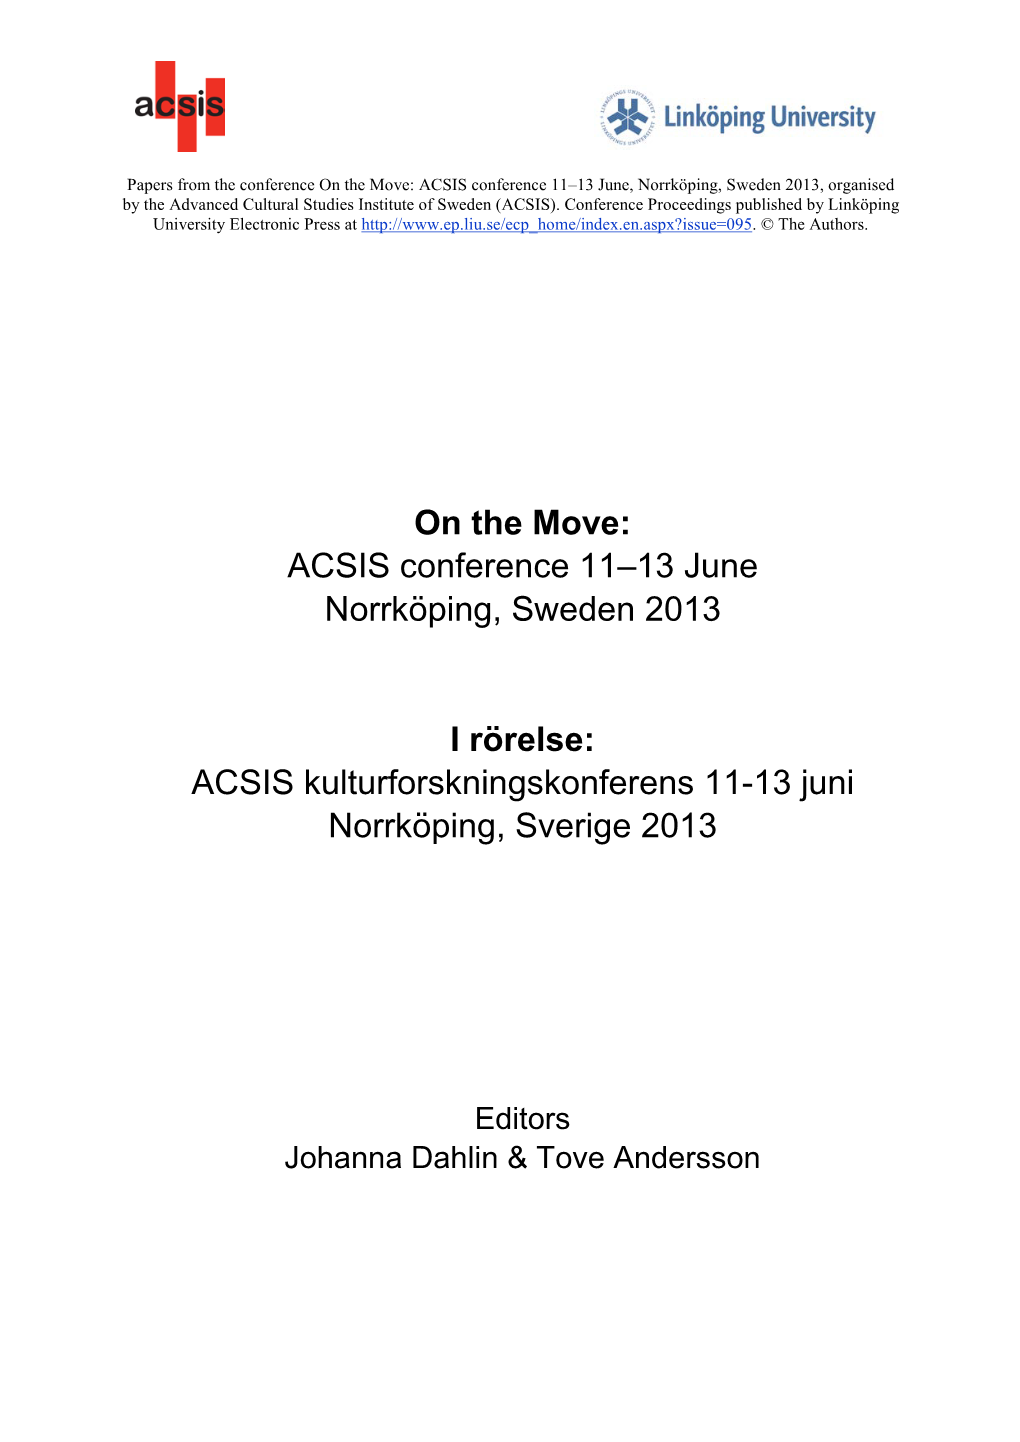 11–13 June, Norrköping, Sweden 2013, Organised by the Advanced Cultural Studies Institute of Sweden (ACSIS)